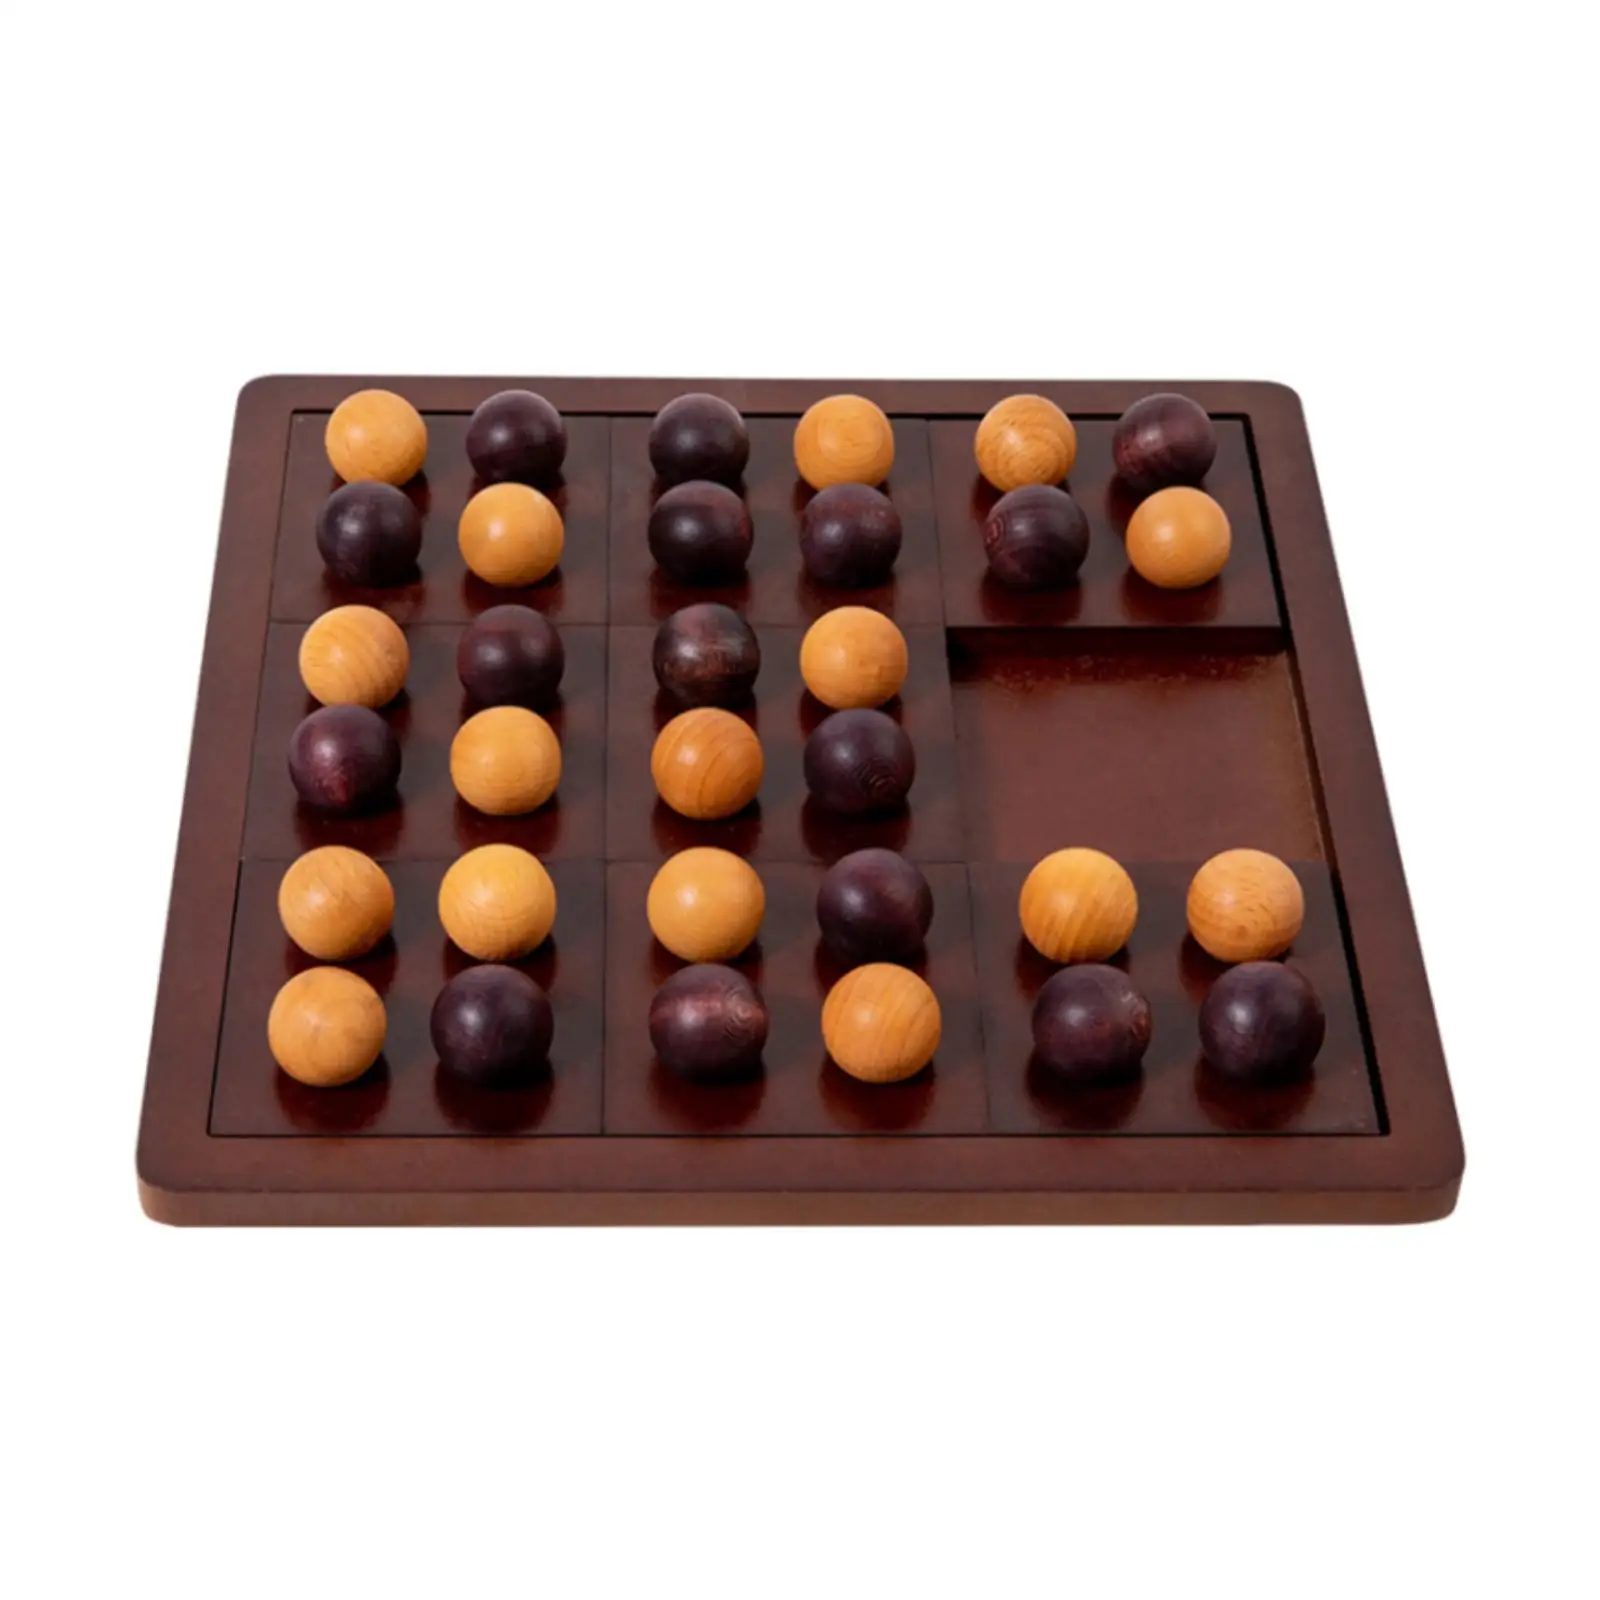 Tic TAC Toe Game Dual Challenge Hand Crafted Interactive Chess Toy for Adults Children Families Outdoor Indoor Entertainment